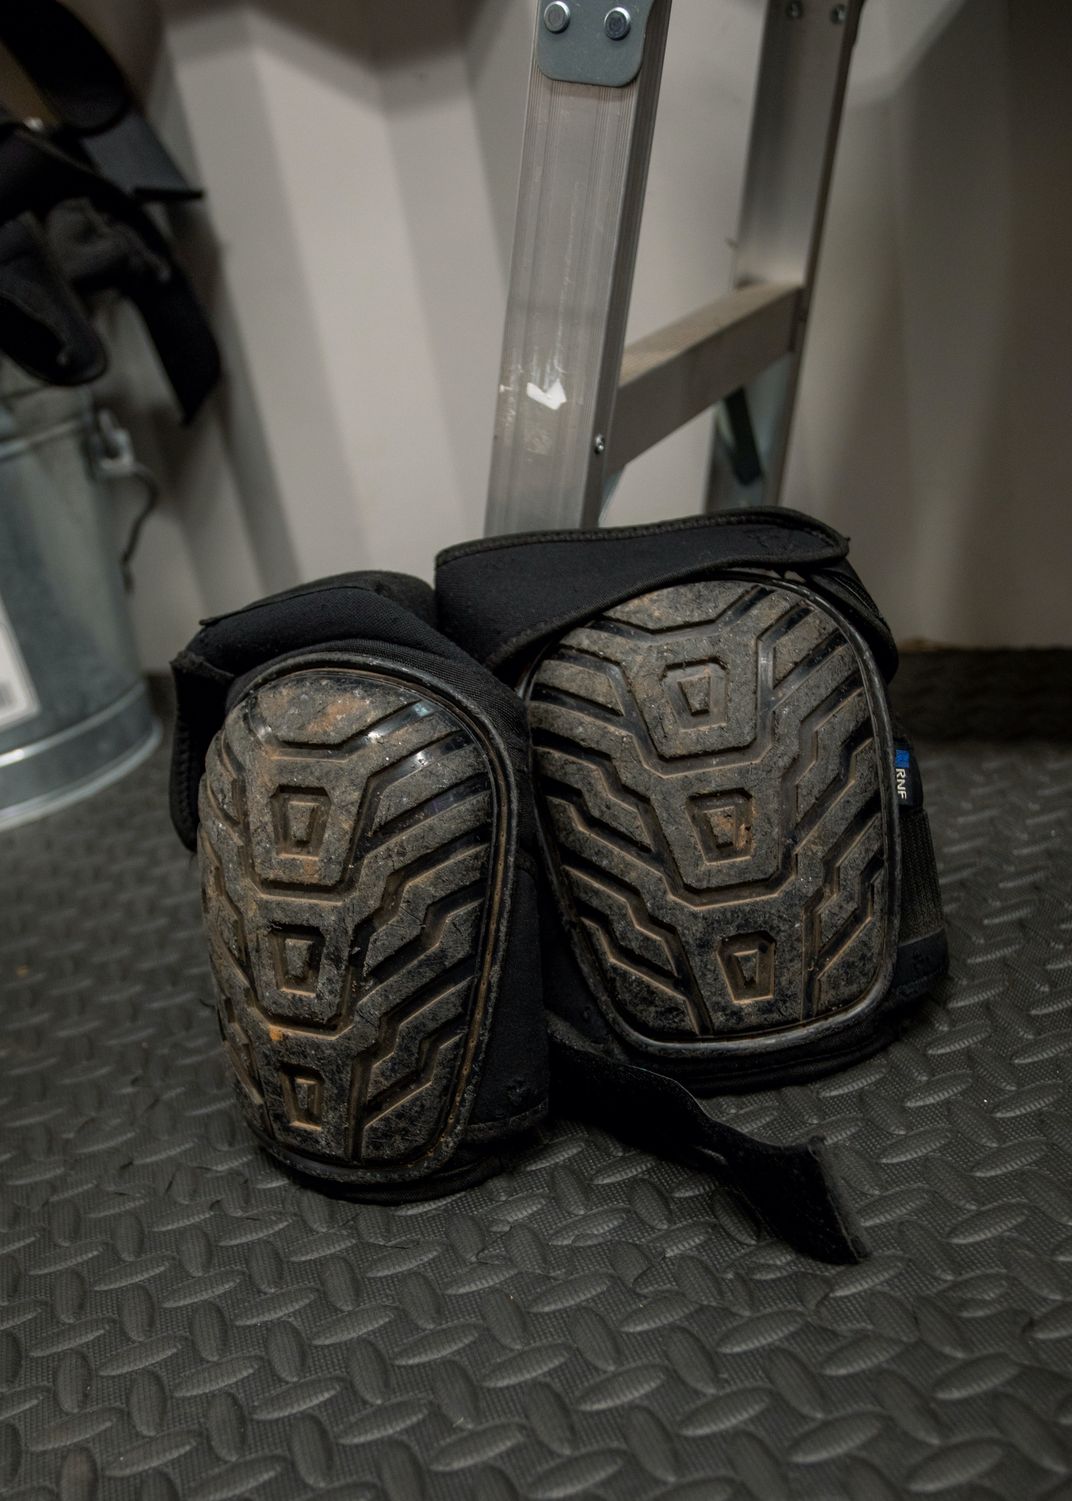 kneepads used for exploring volcanic terrain.